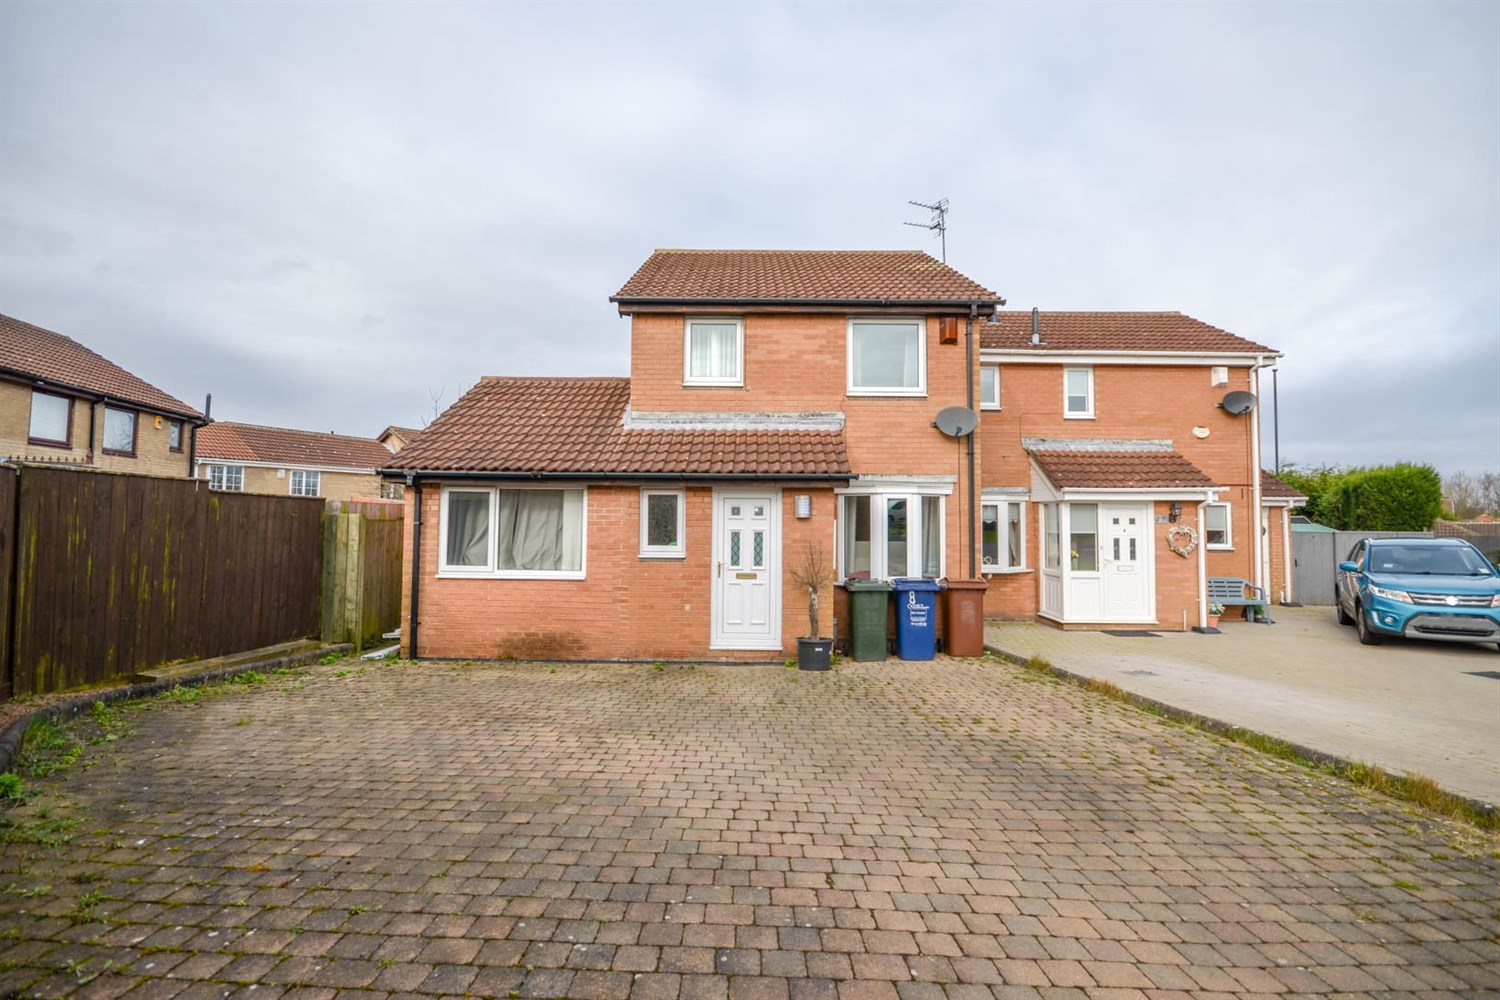 3 bed semi-detached house for sale in Reedham Court, Meadow Rise - Property Image 1